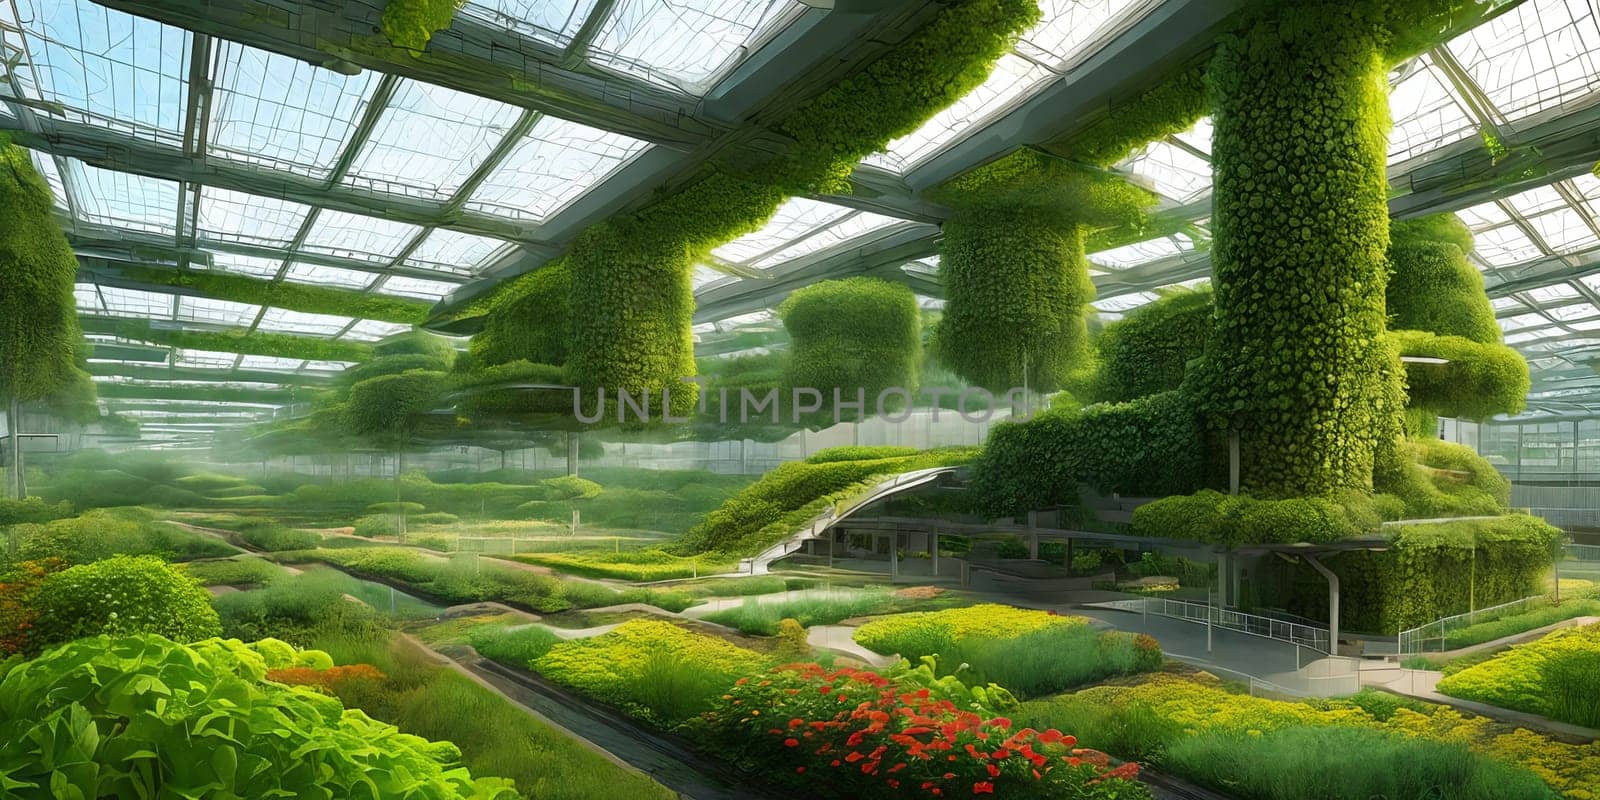 A futuristic digital masterpiece envisioning a high-tech agricultural hub. See automated farming machines thriving vertical gardens. by GoodOlga